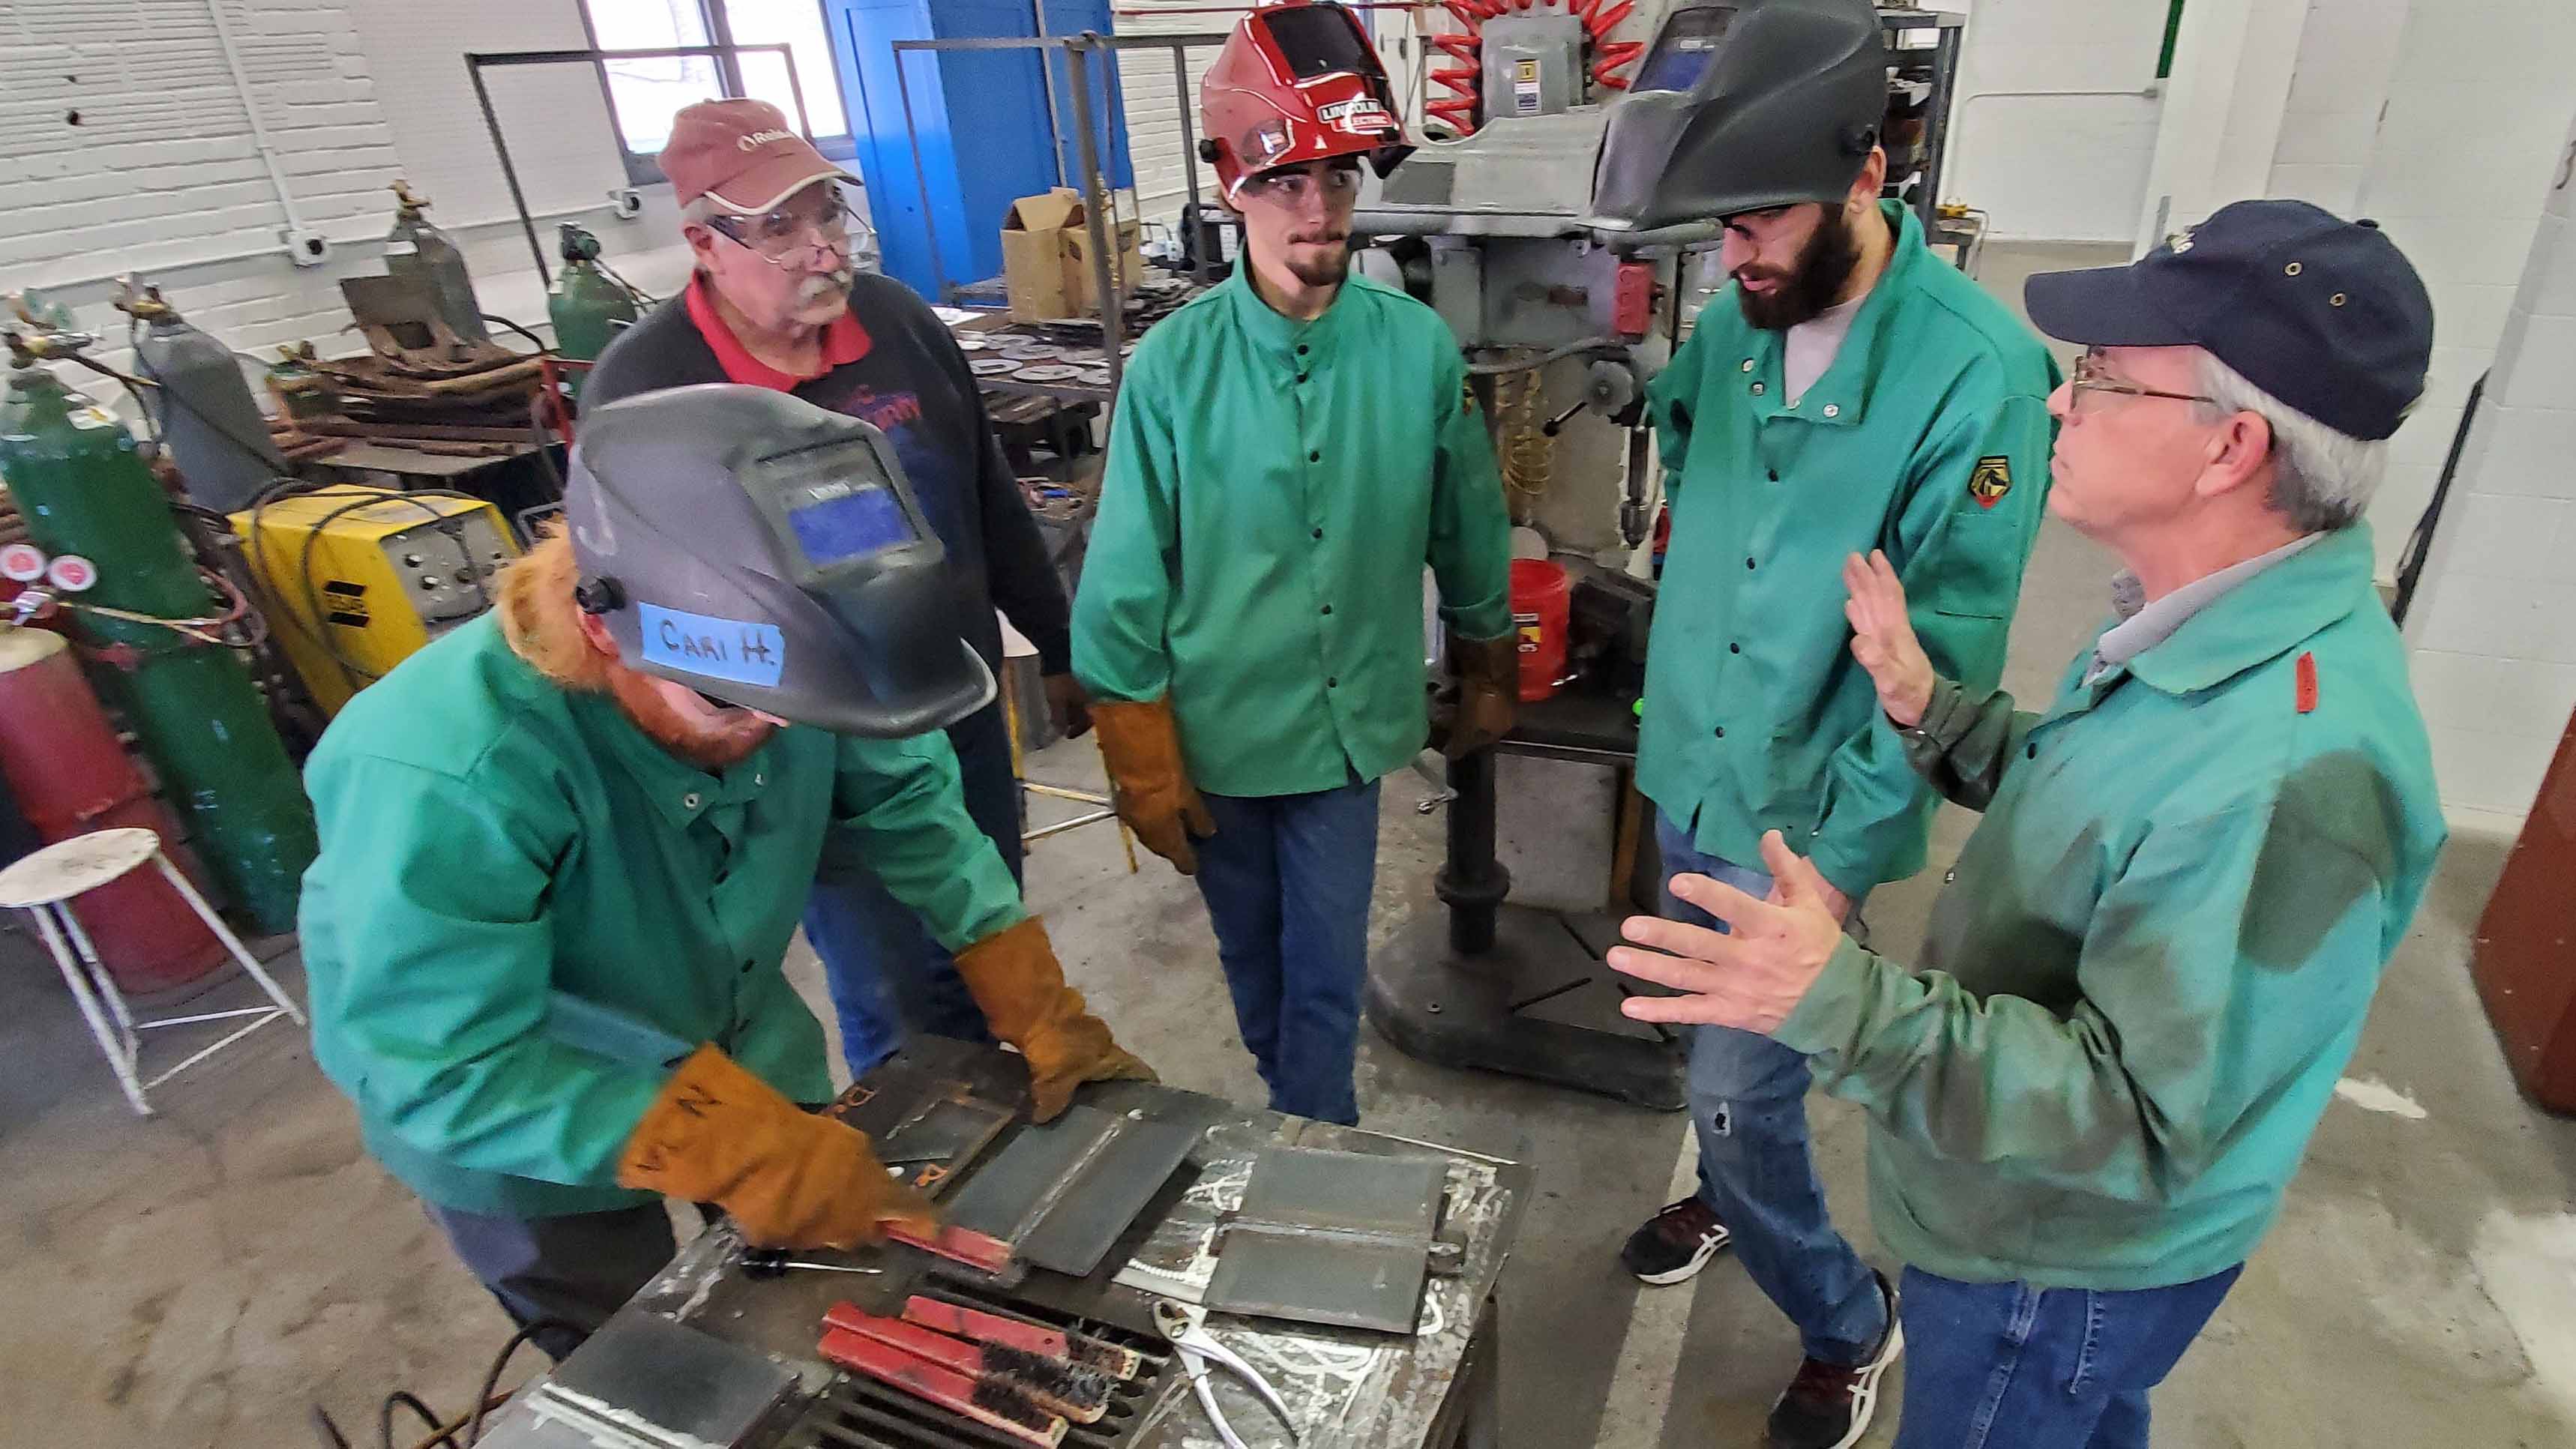 Certified Welding Inspector Chuck Hatzenbuehler (far right) describes the national certification criteria to (from left) Dalton Olsen, instructor Dan Stehlik, Clancey Smith and Sam Schukei. (Photo by Crawford / NCTA News)